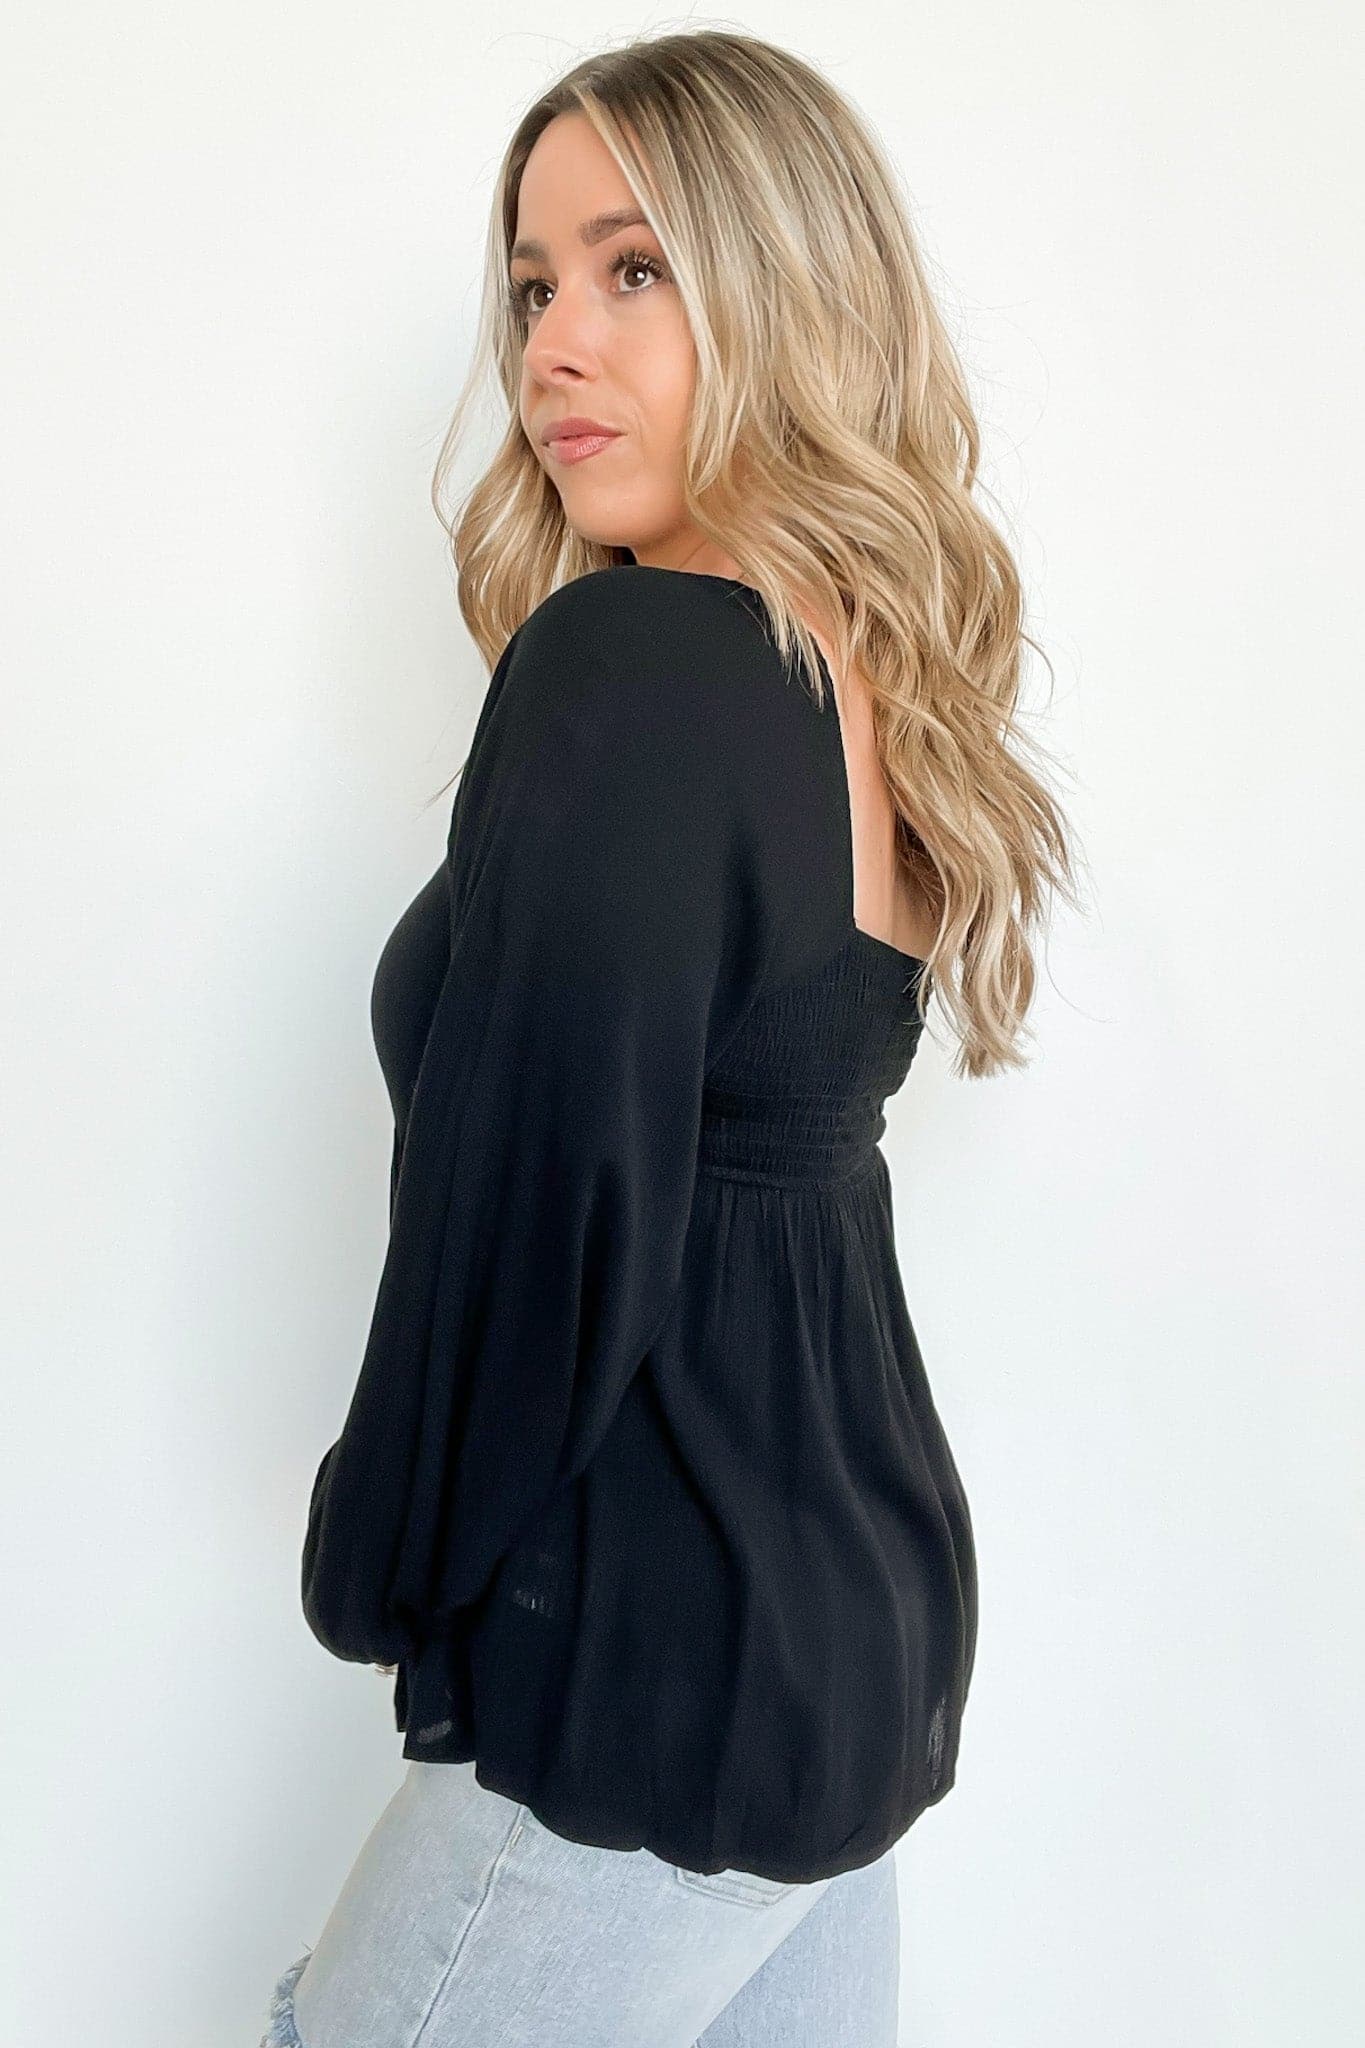  Luannie Flowy Peasant Top - FINAL SALE - Madison and Mallory